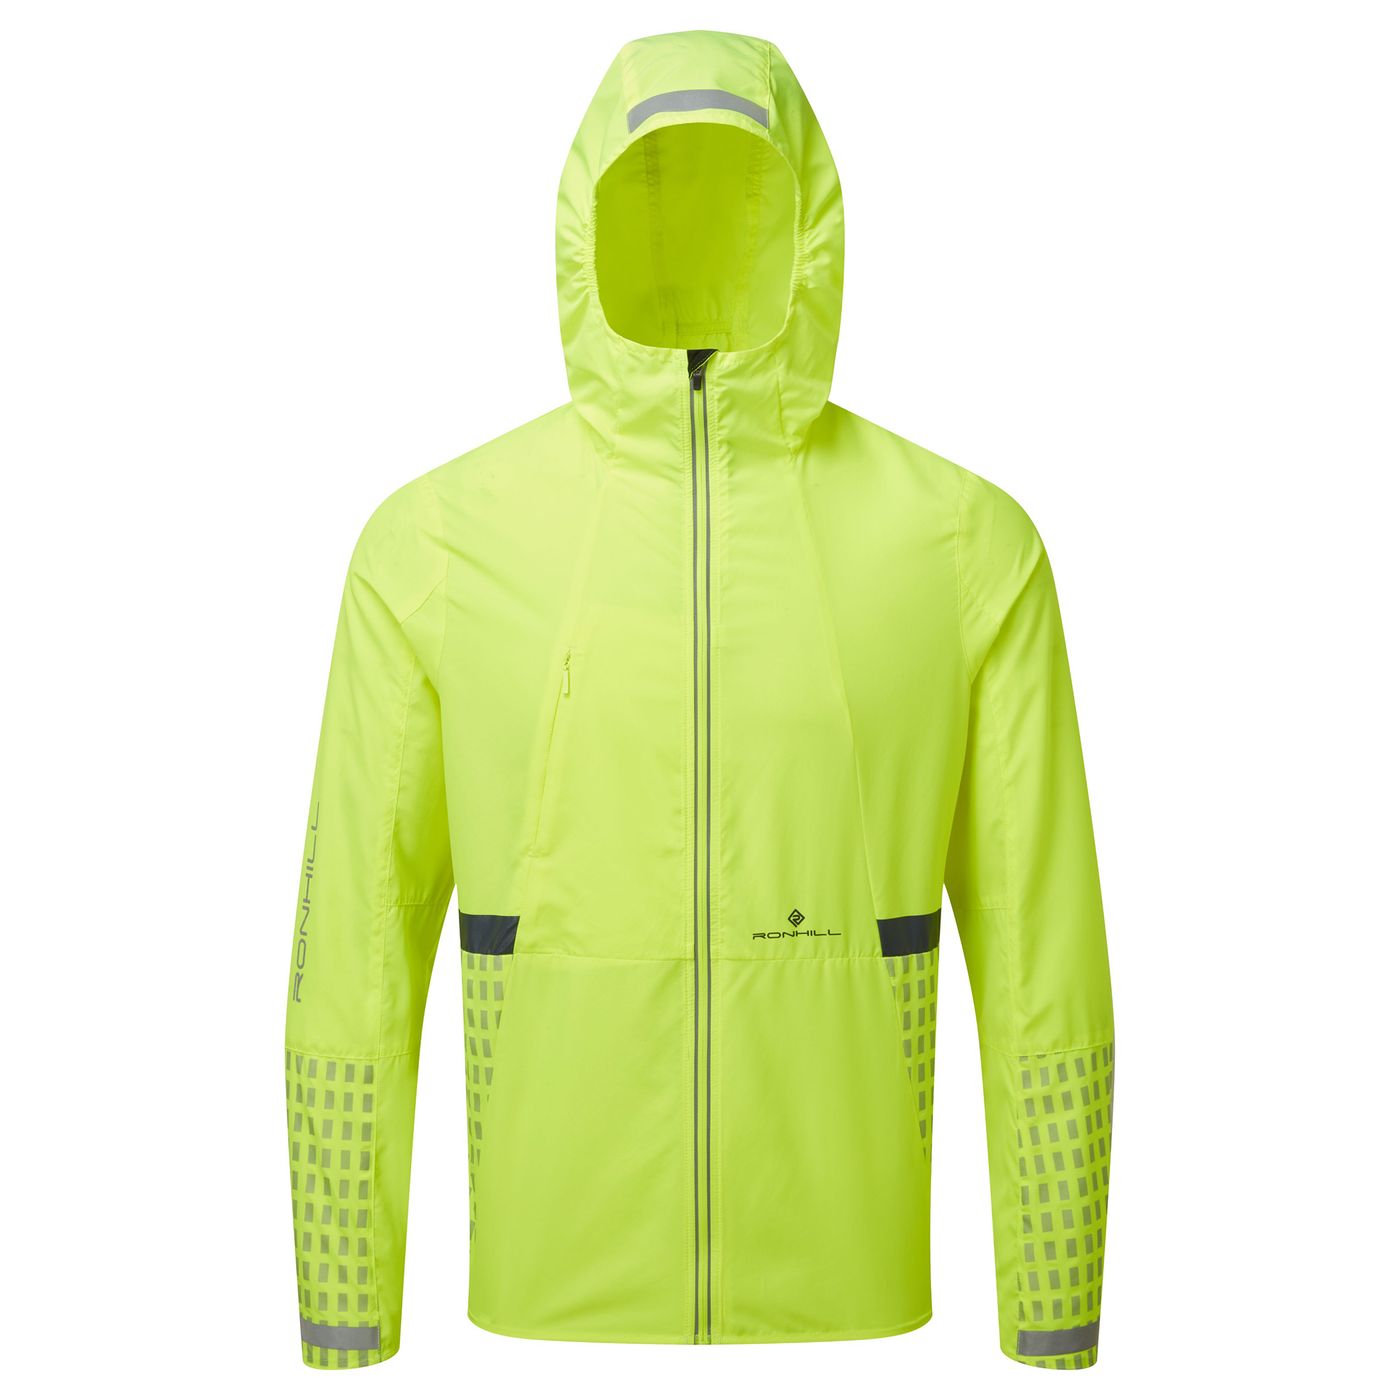 RonHill Mens Tech Afterhours Jacket - Fluo Yellow/Charcoal/Reflect